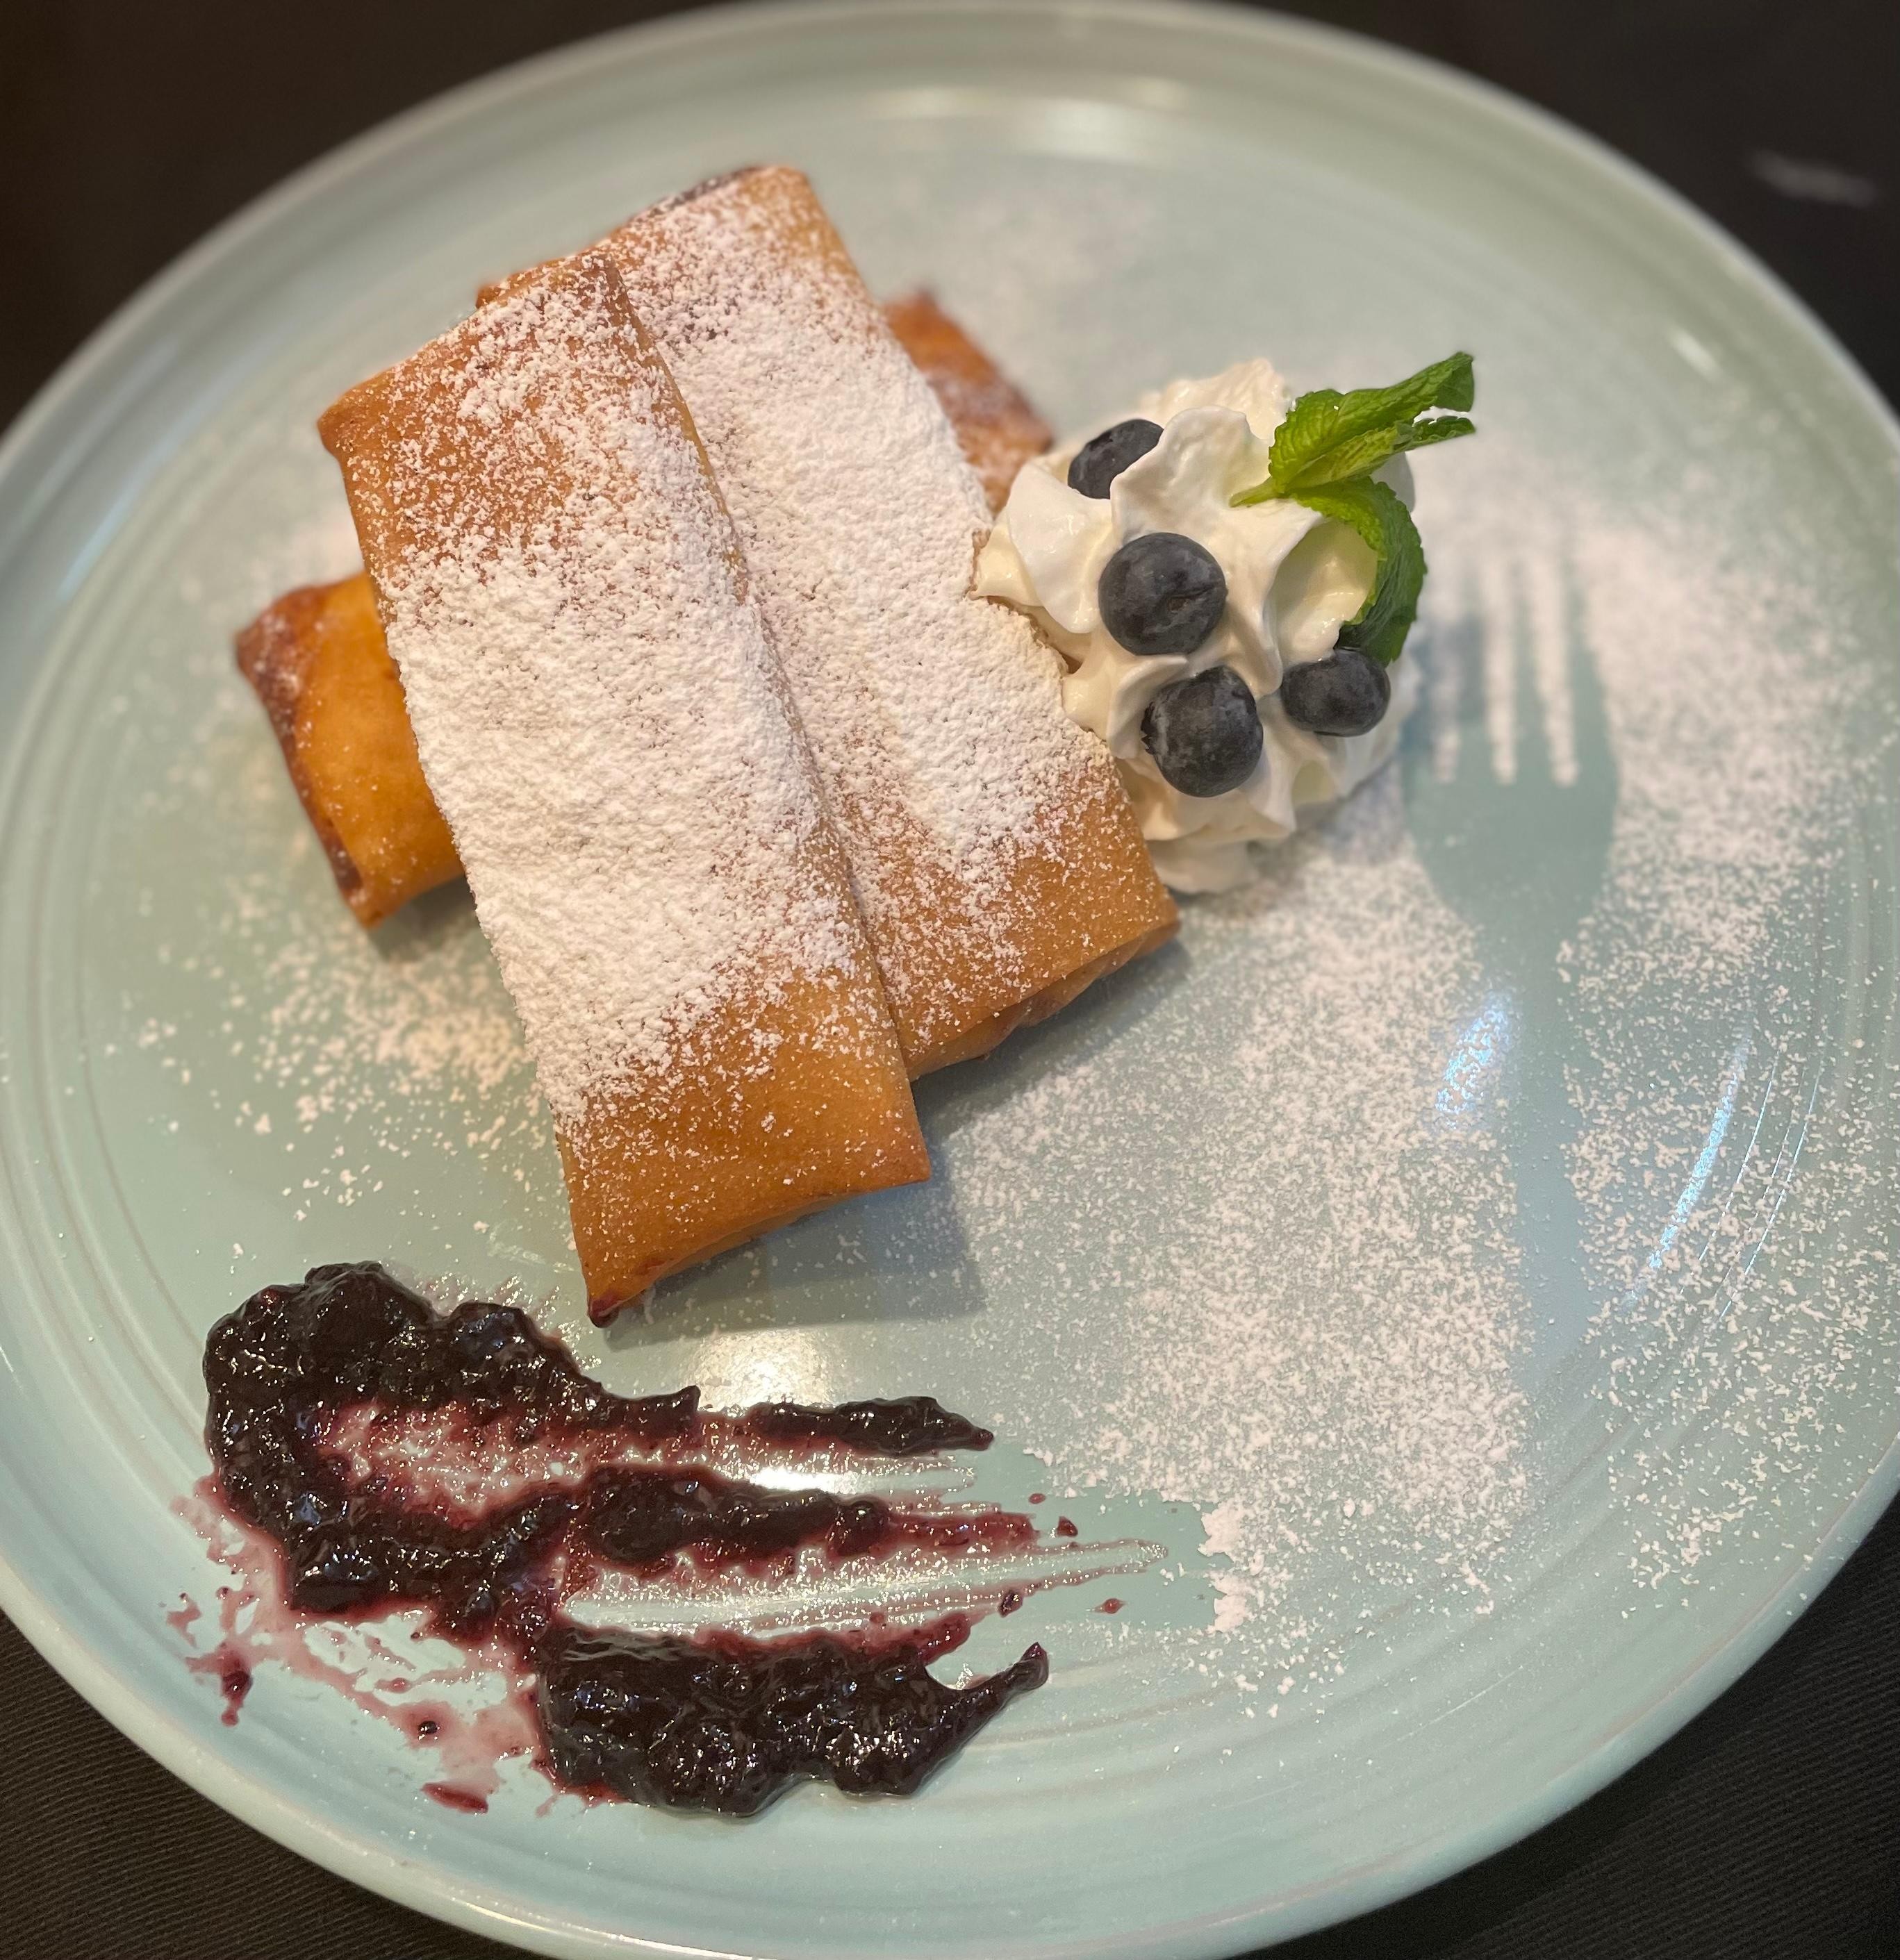 Blueberry cheese spring roll